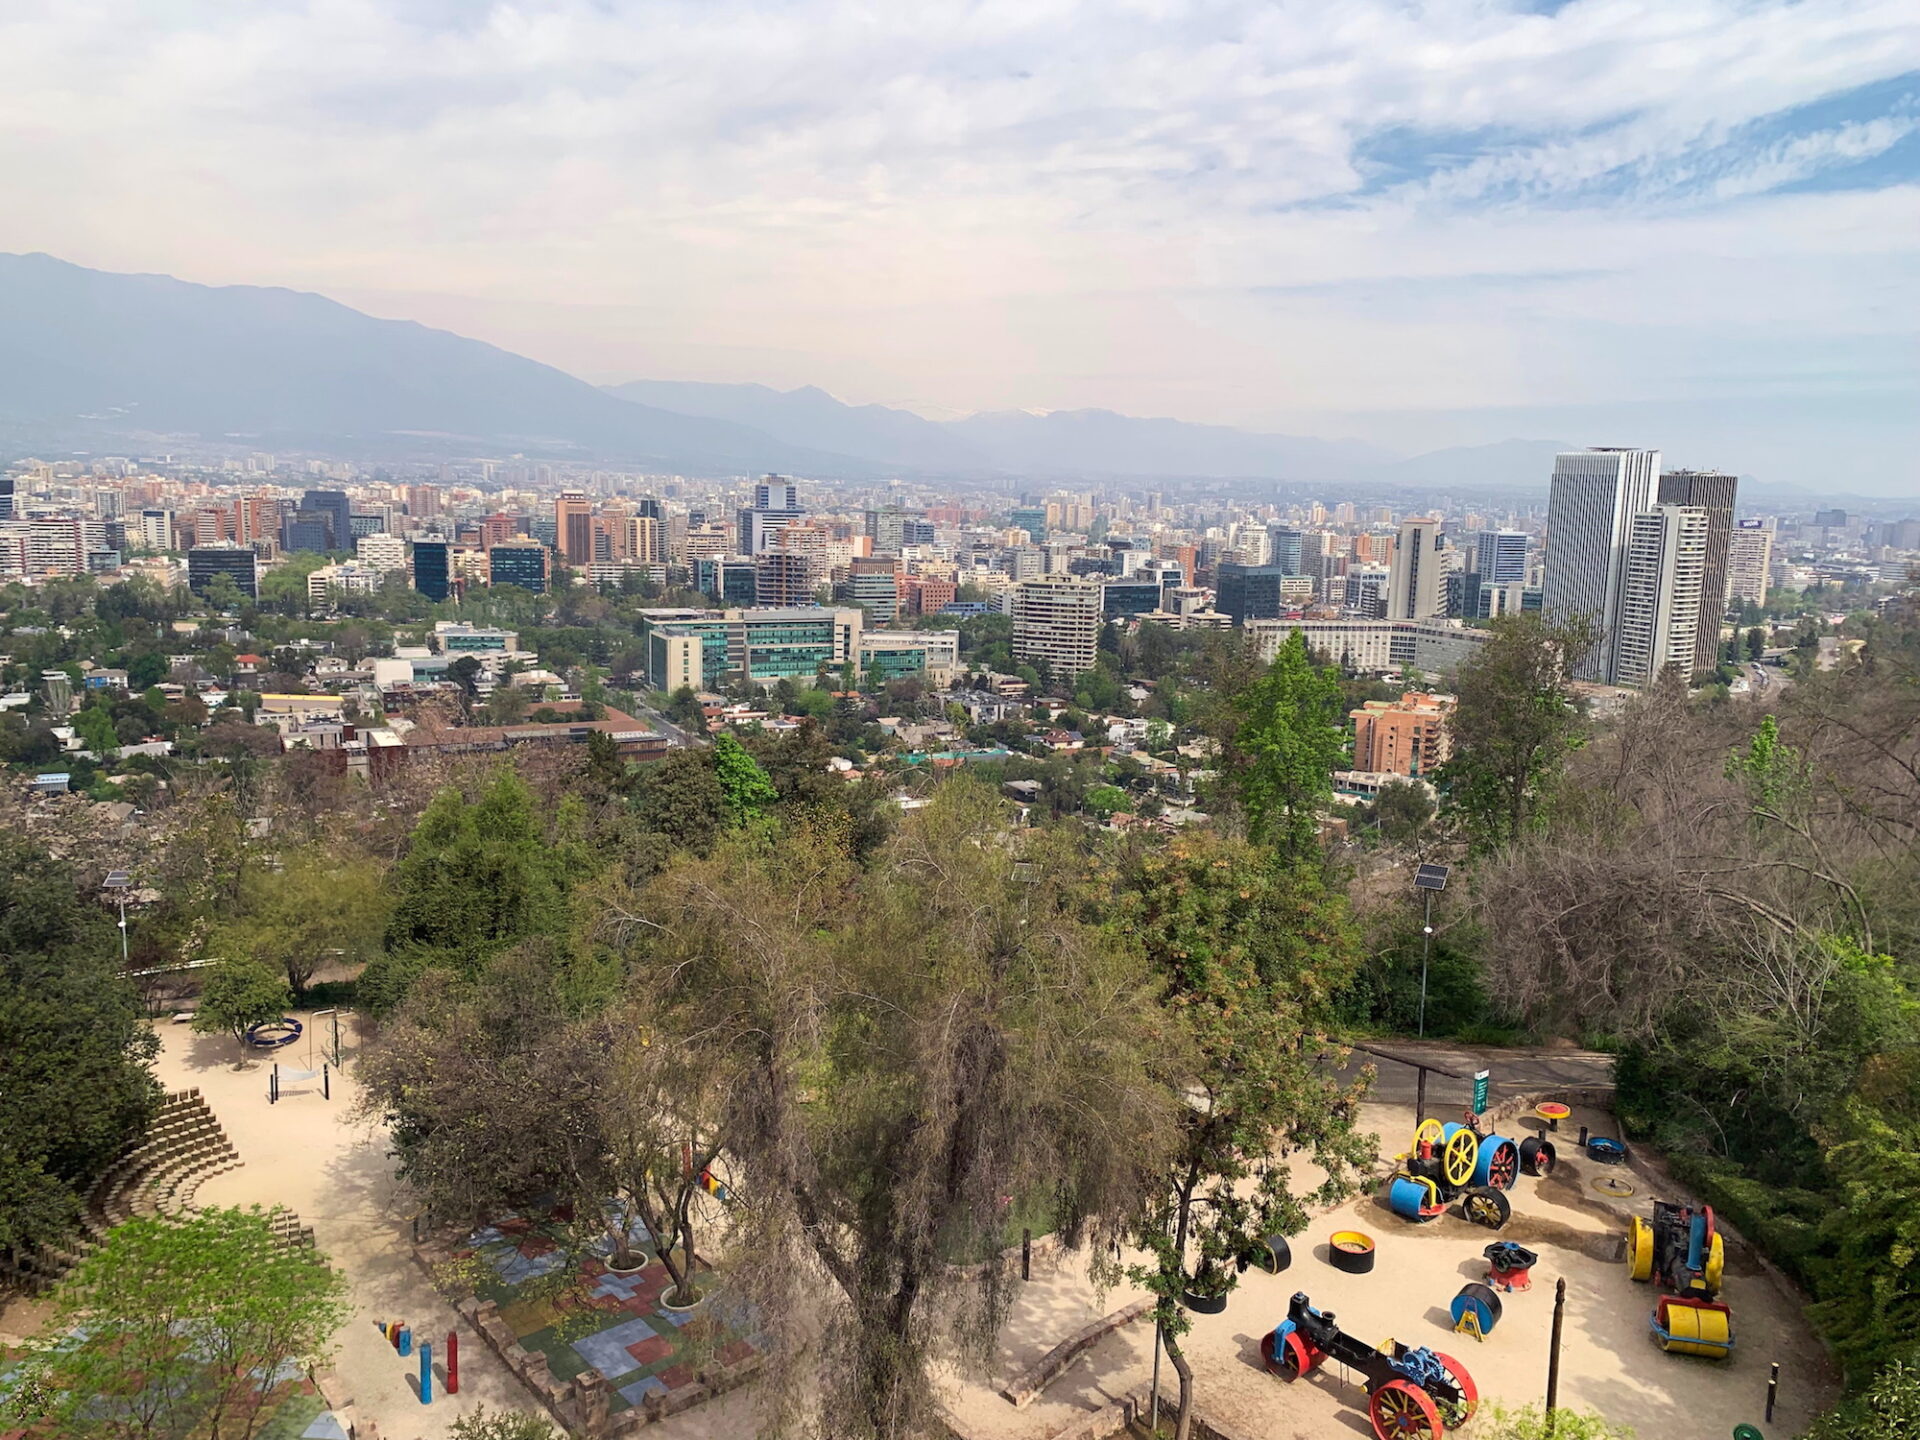 How to Spend One Day in Santiago, Chile